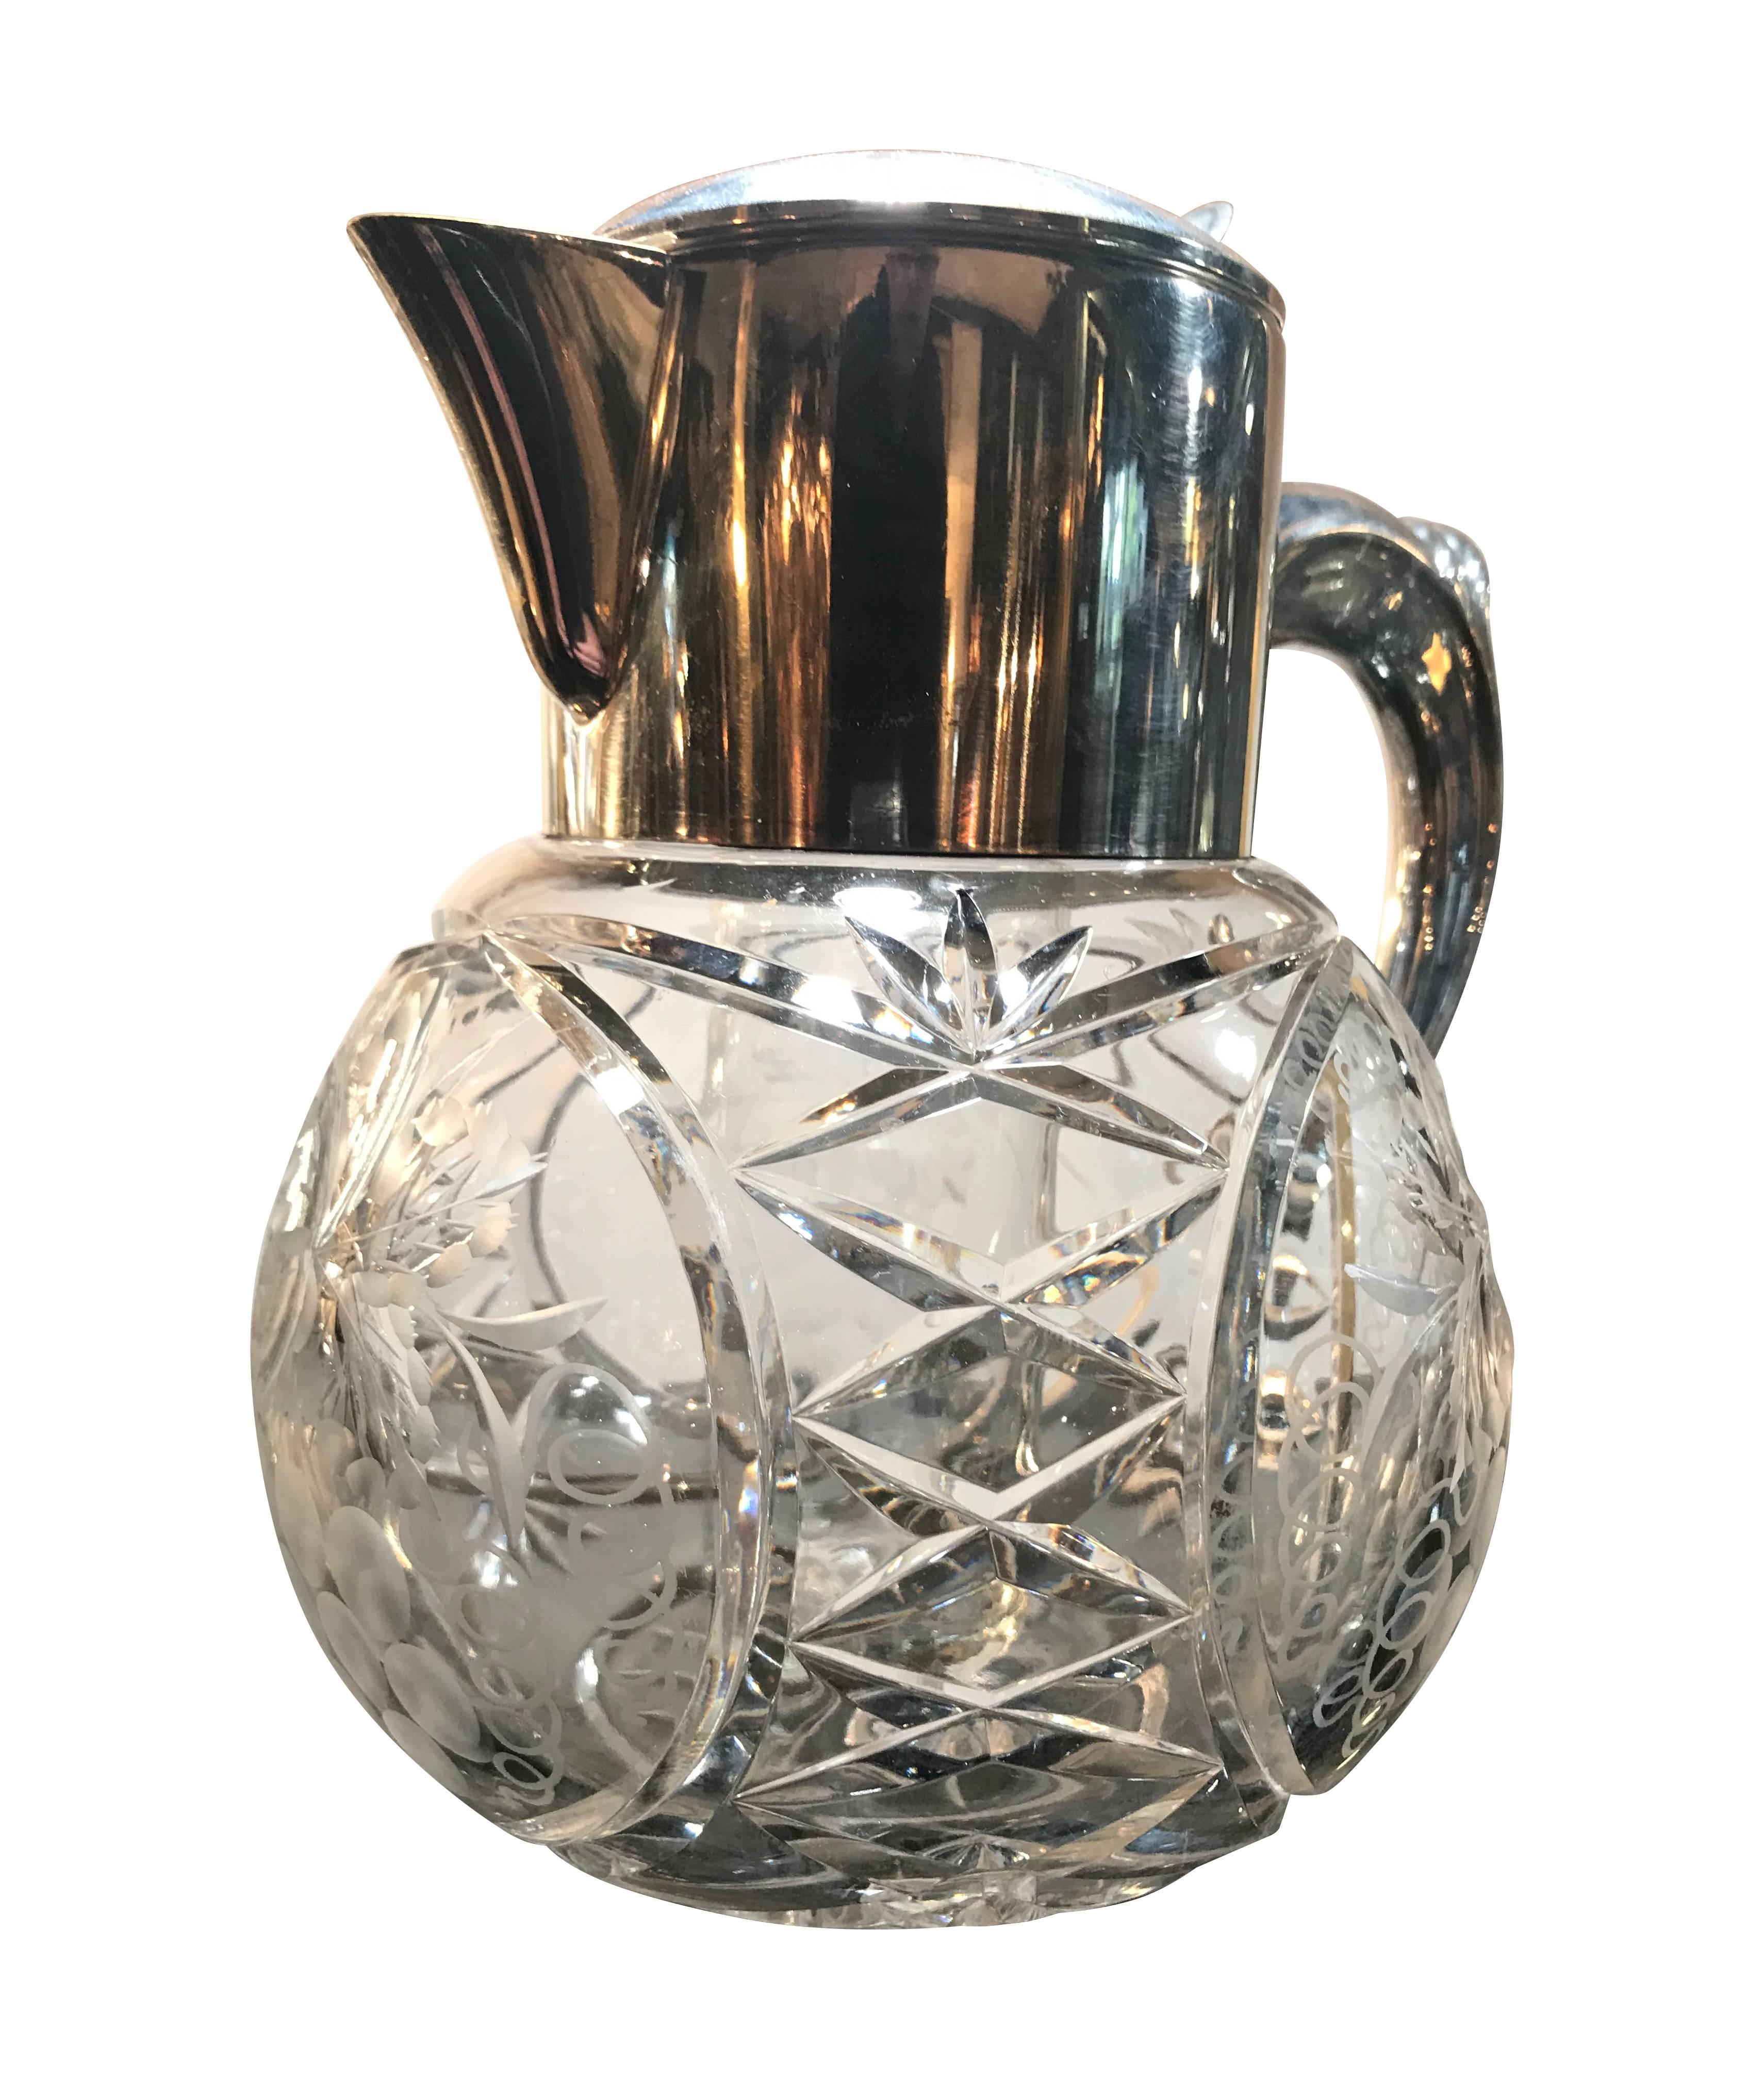 Mid-20th Century Cut Glass and Silver Plated Lemonade or Cocktail Jug